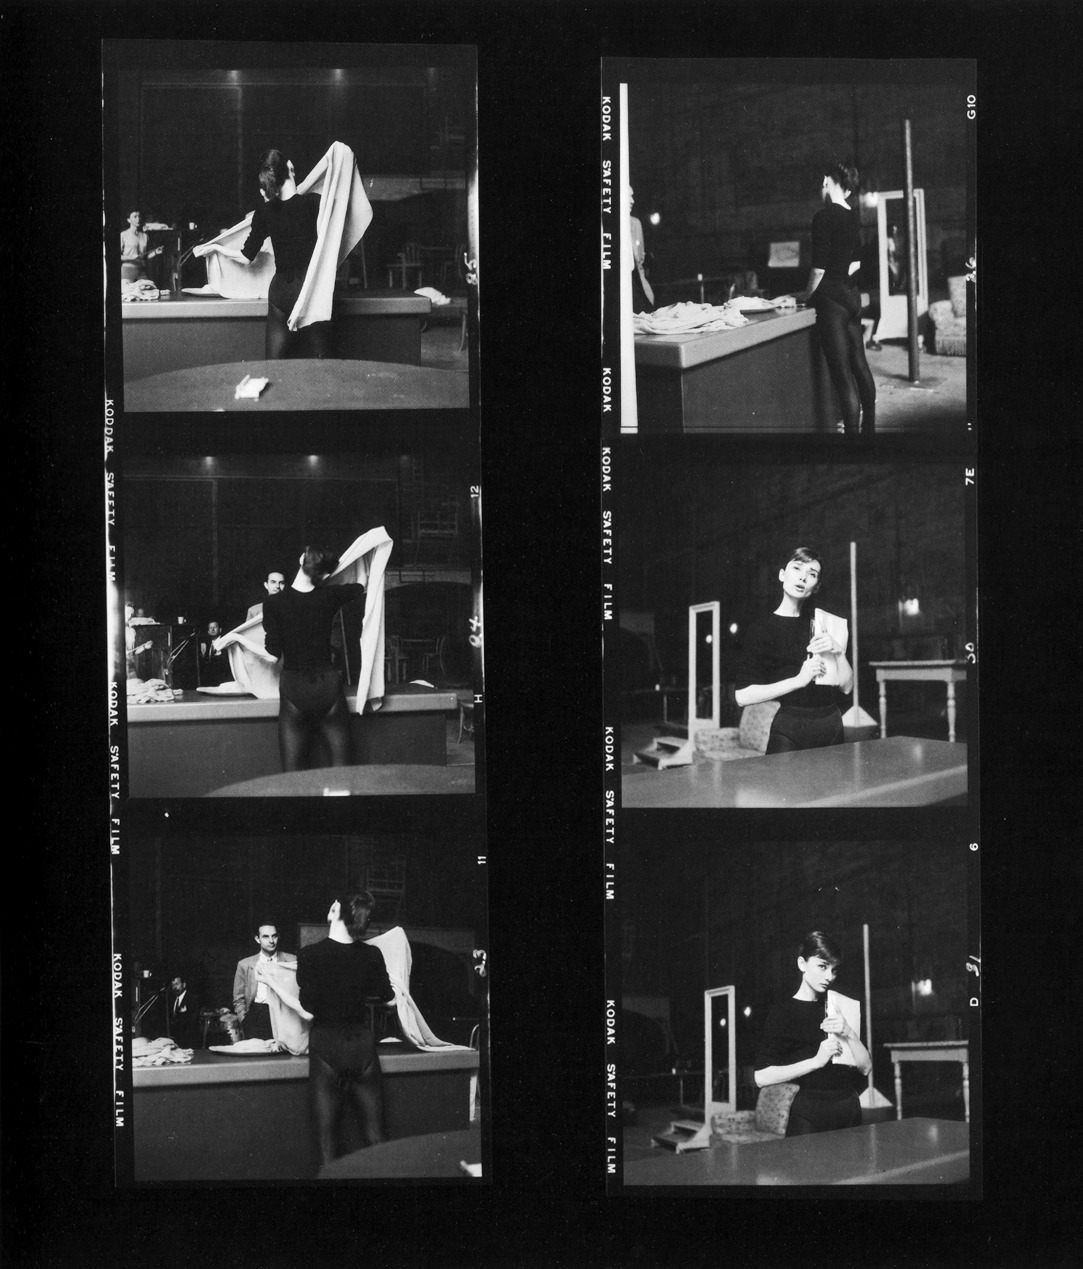 Film strips of Audrey Hepburn at a rehearsal performing How Long Has This Been Going On? for the movie Funny Face, 1956.